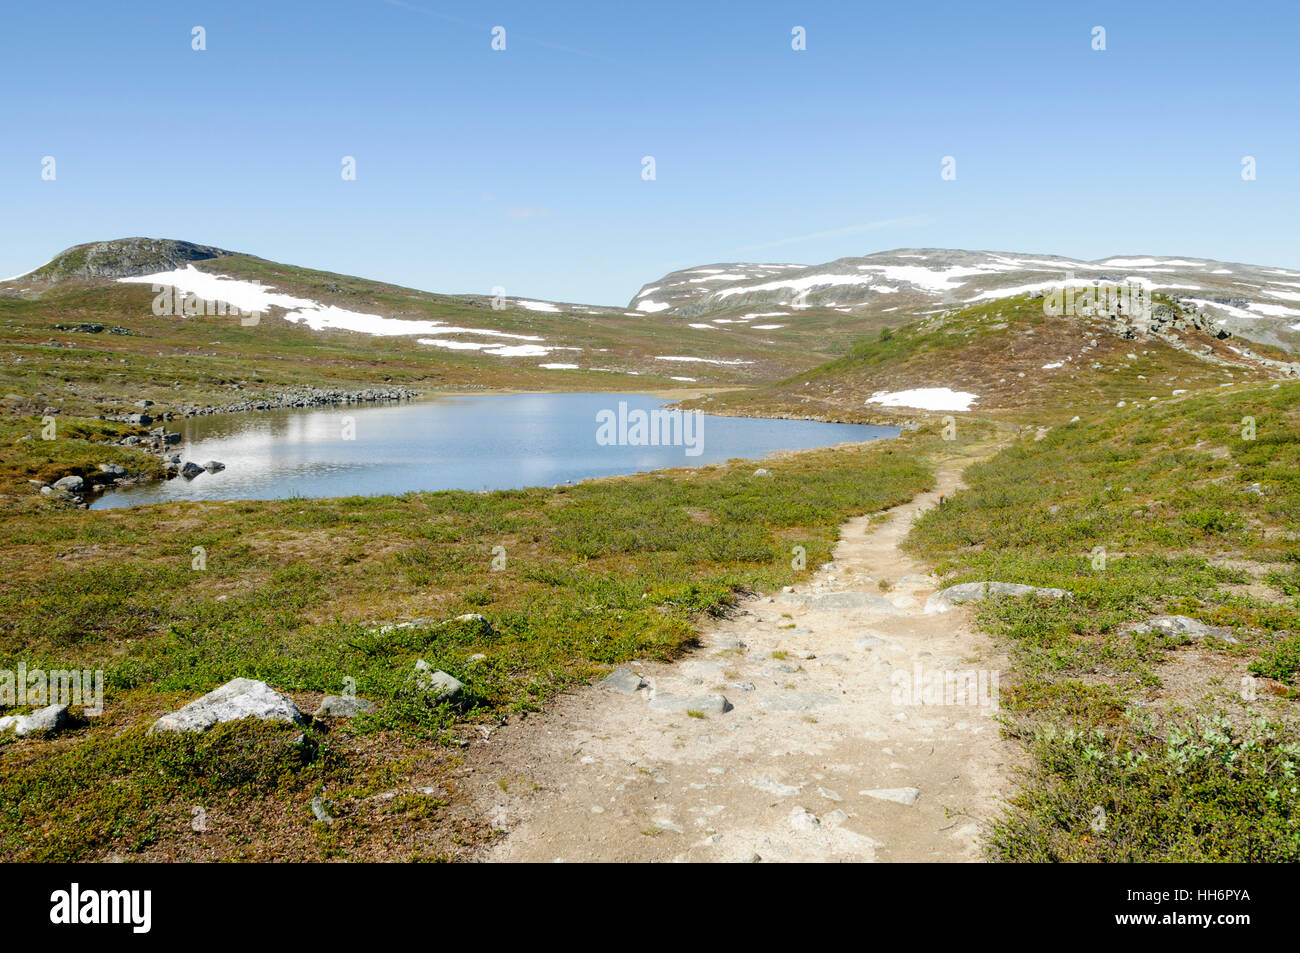 Lapland landscape: hiking path in Malla Strict Nature Reserve in Kilpisjarvi, Lapland, Finland, Europe Stock Photo